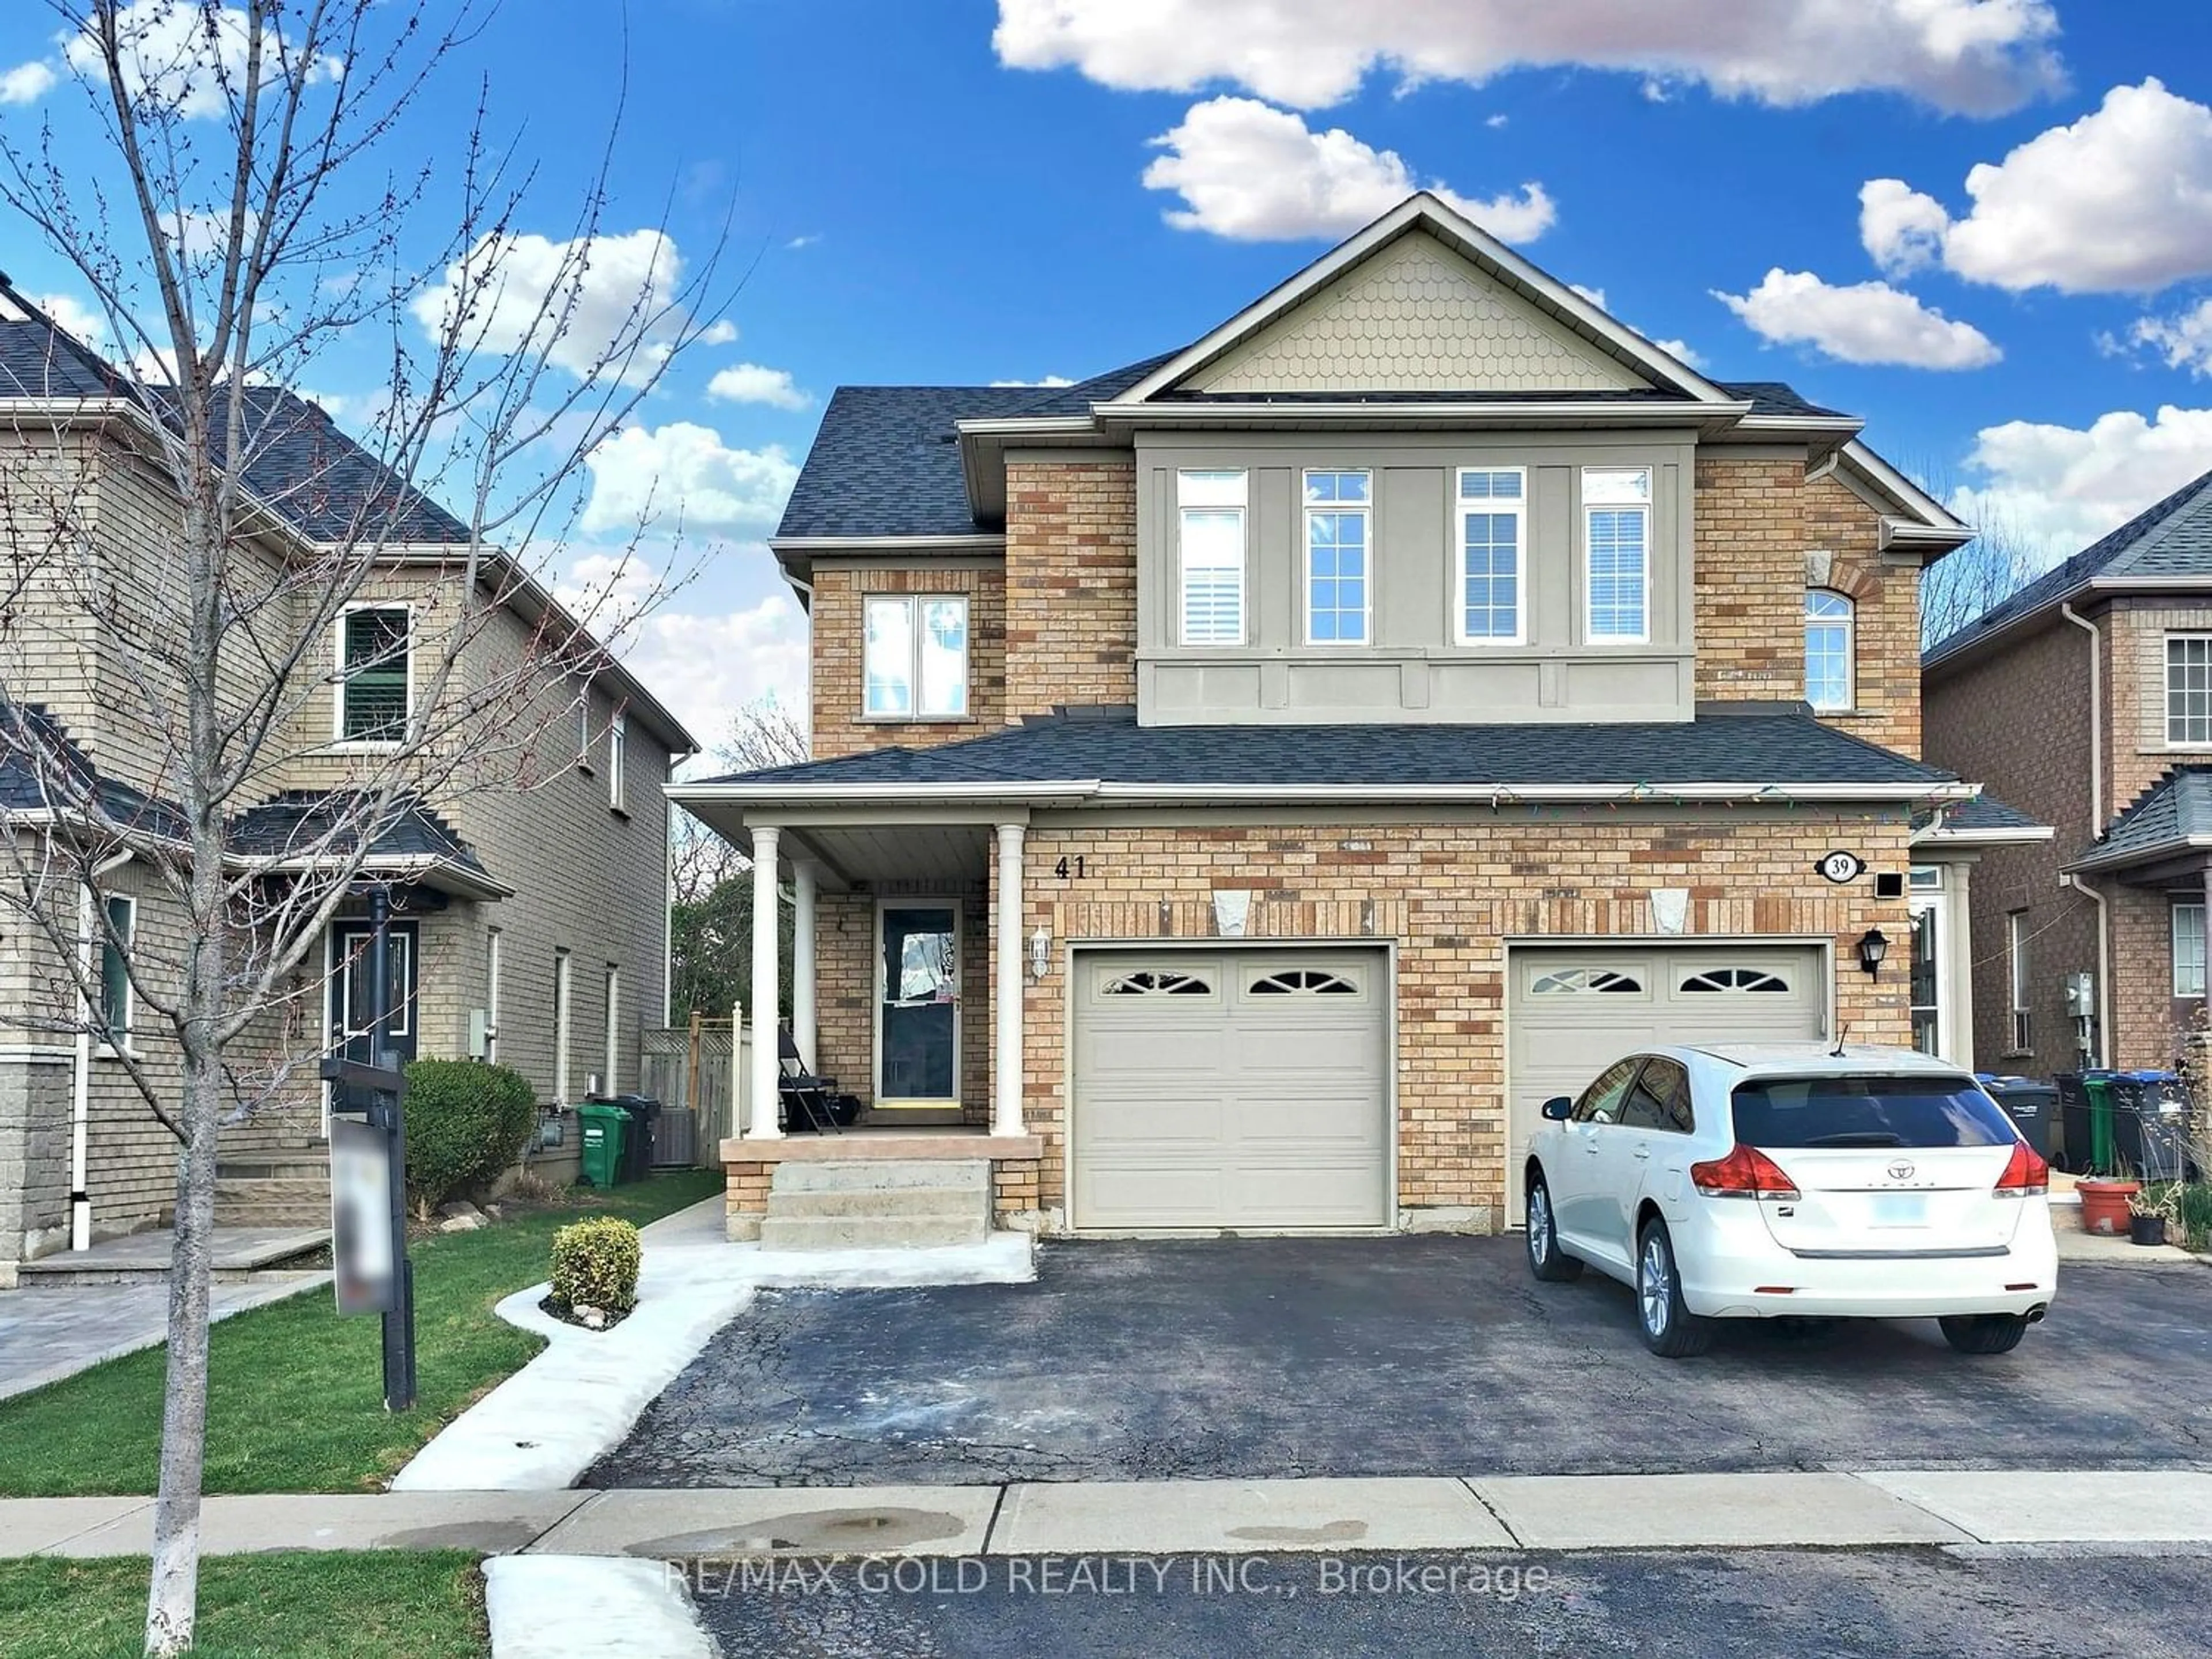 Home with brick exterior material for 41 Brookstone Crt, Caledon Ontario L7C 1C8